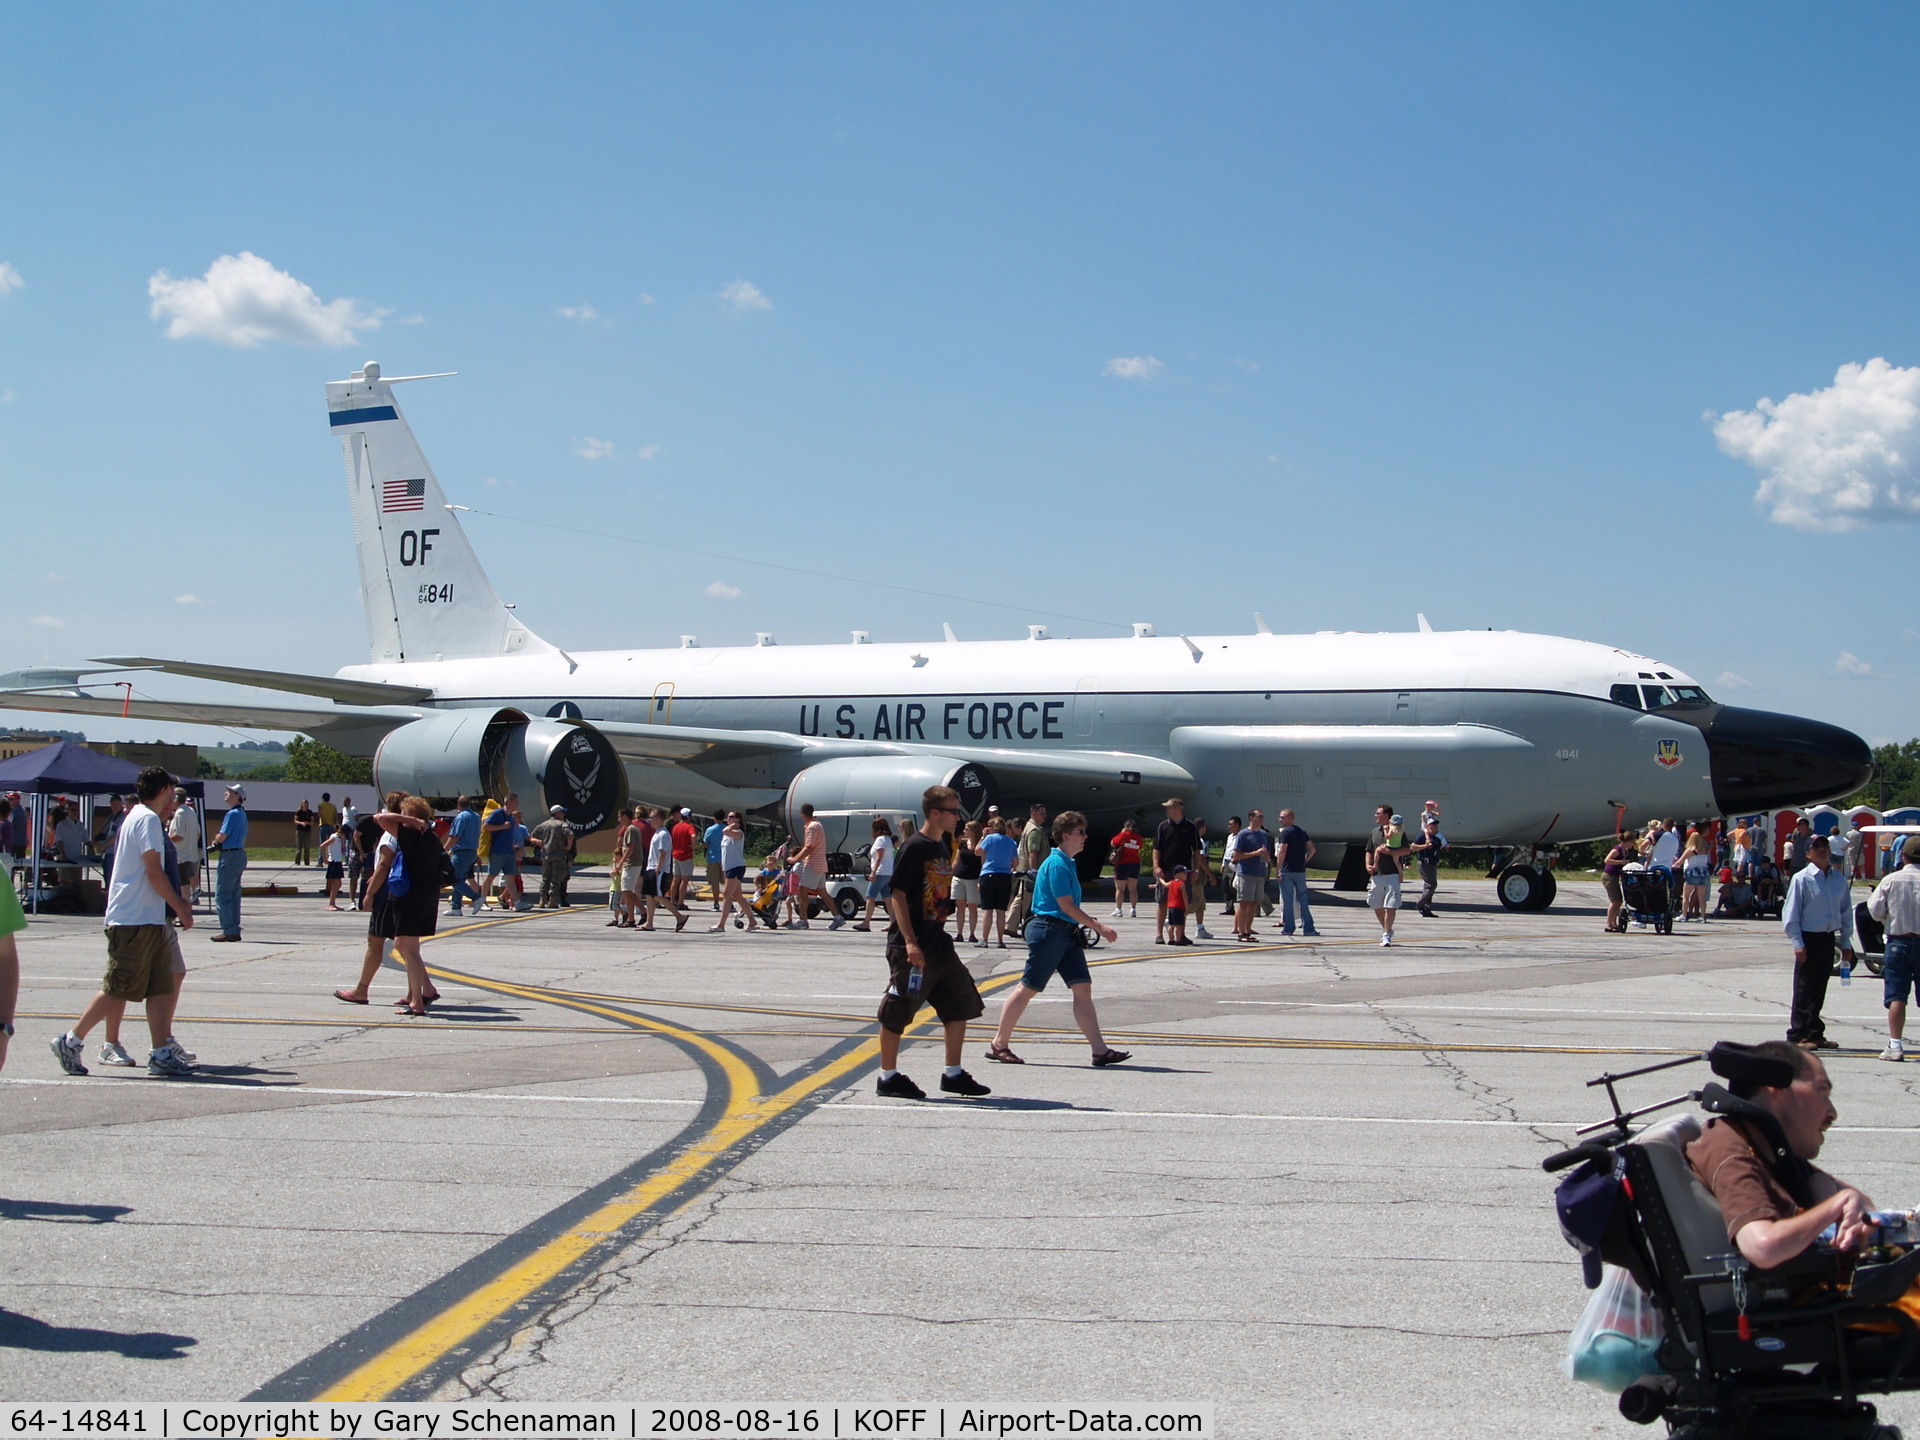 64-14841, 1964 Boeing RC-135V Rivet Joint C/N 18781, ON TARMAC AT OFFUTT AFB 2008